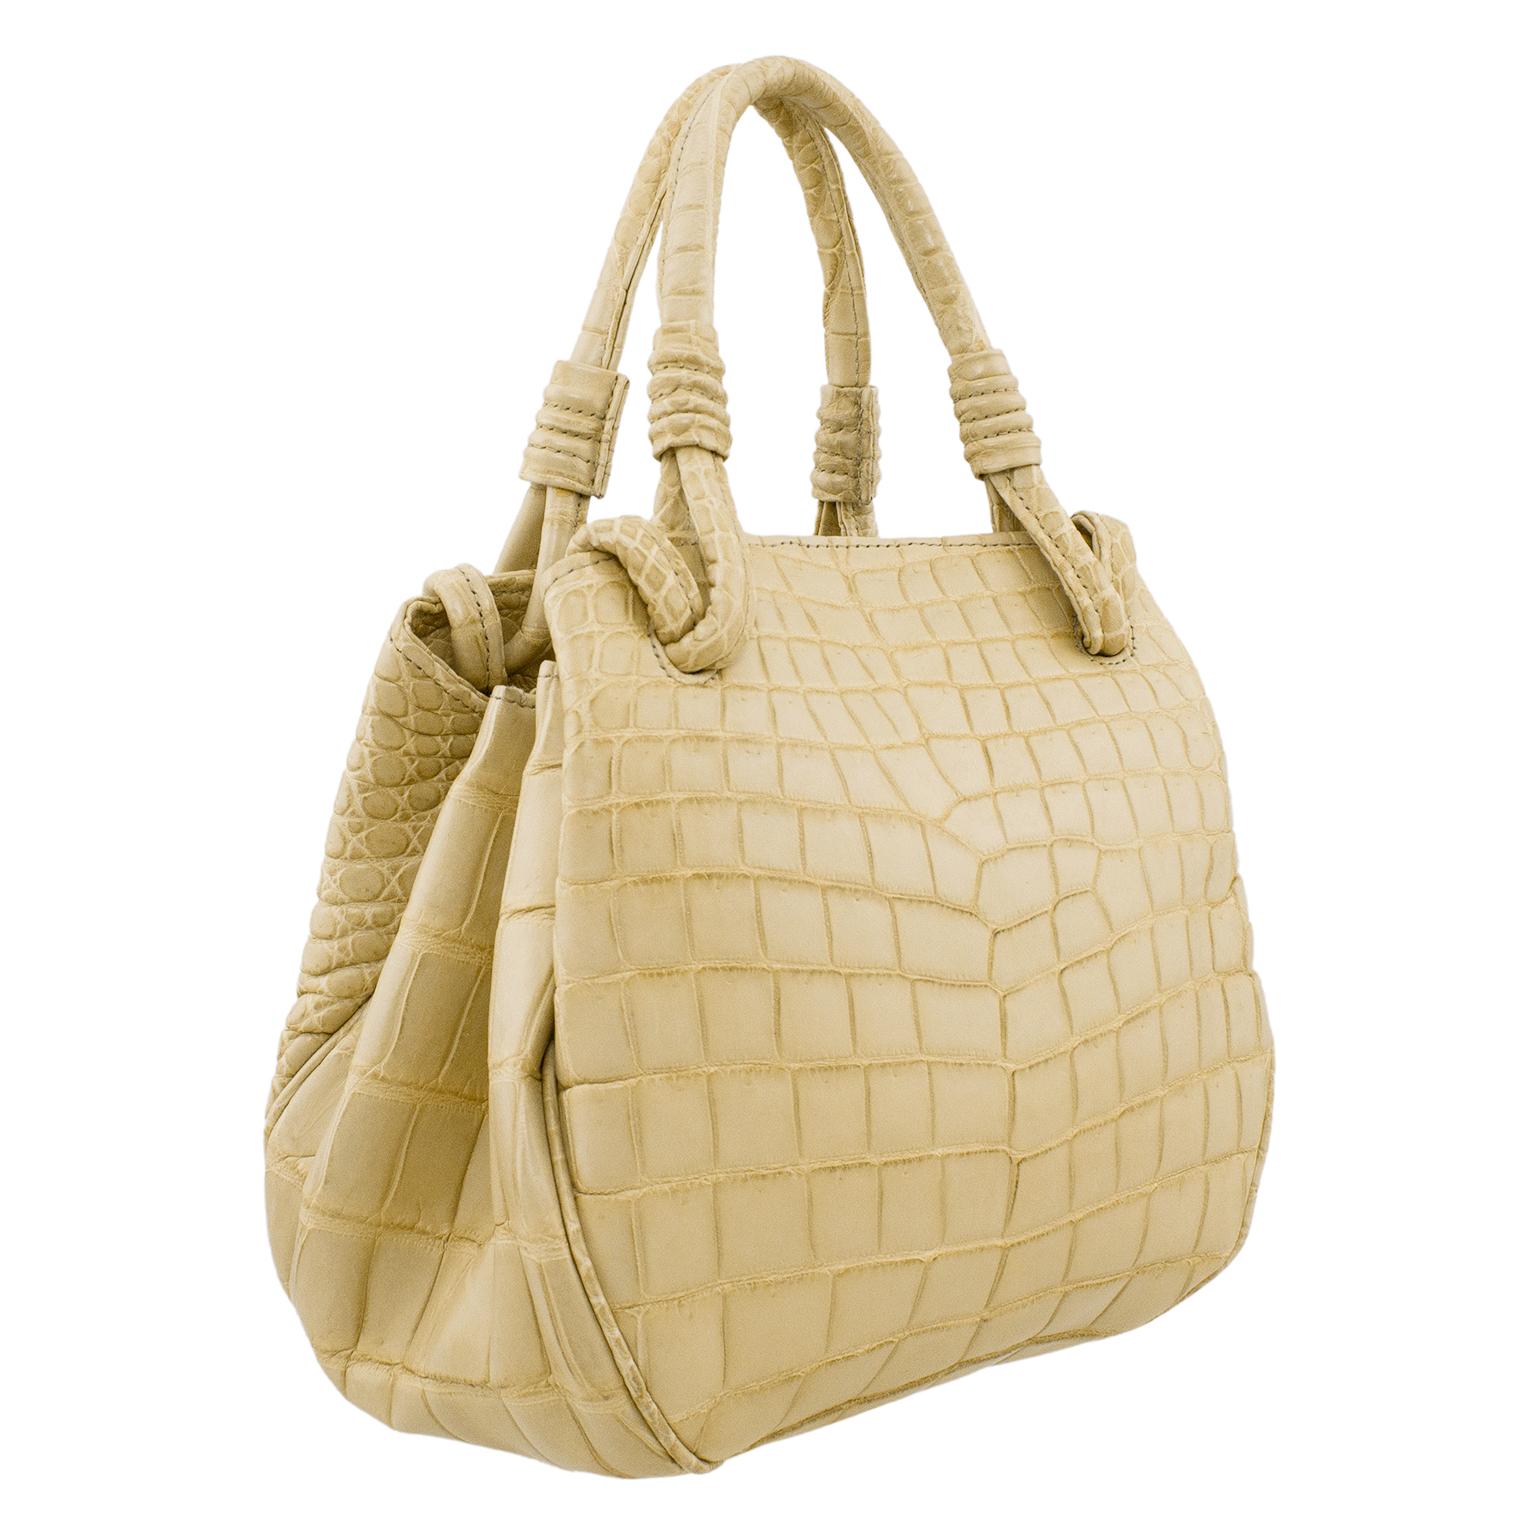 Just stunning matte beige croc effect handbag made in Italy for high end Canadian retailer Davids in the 1990's. Great shape and size, slightly rounded with top handles. This bag looks like it is on the smaller size, but it opens accordion style and